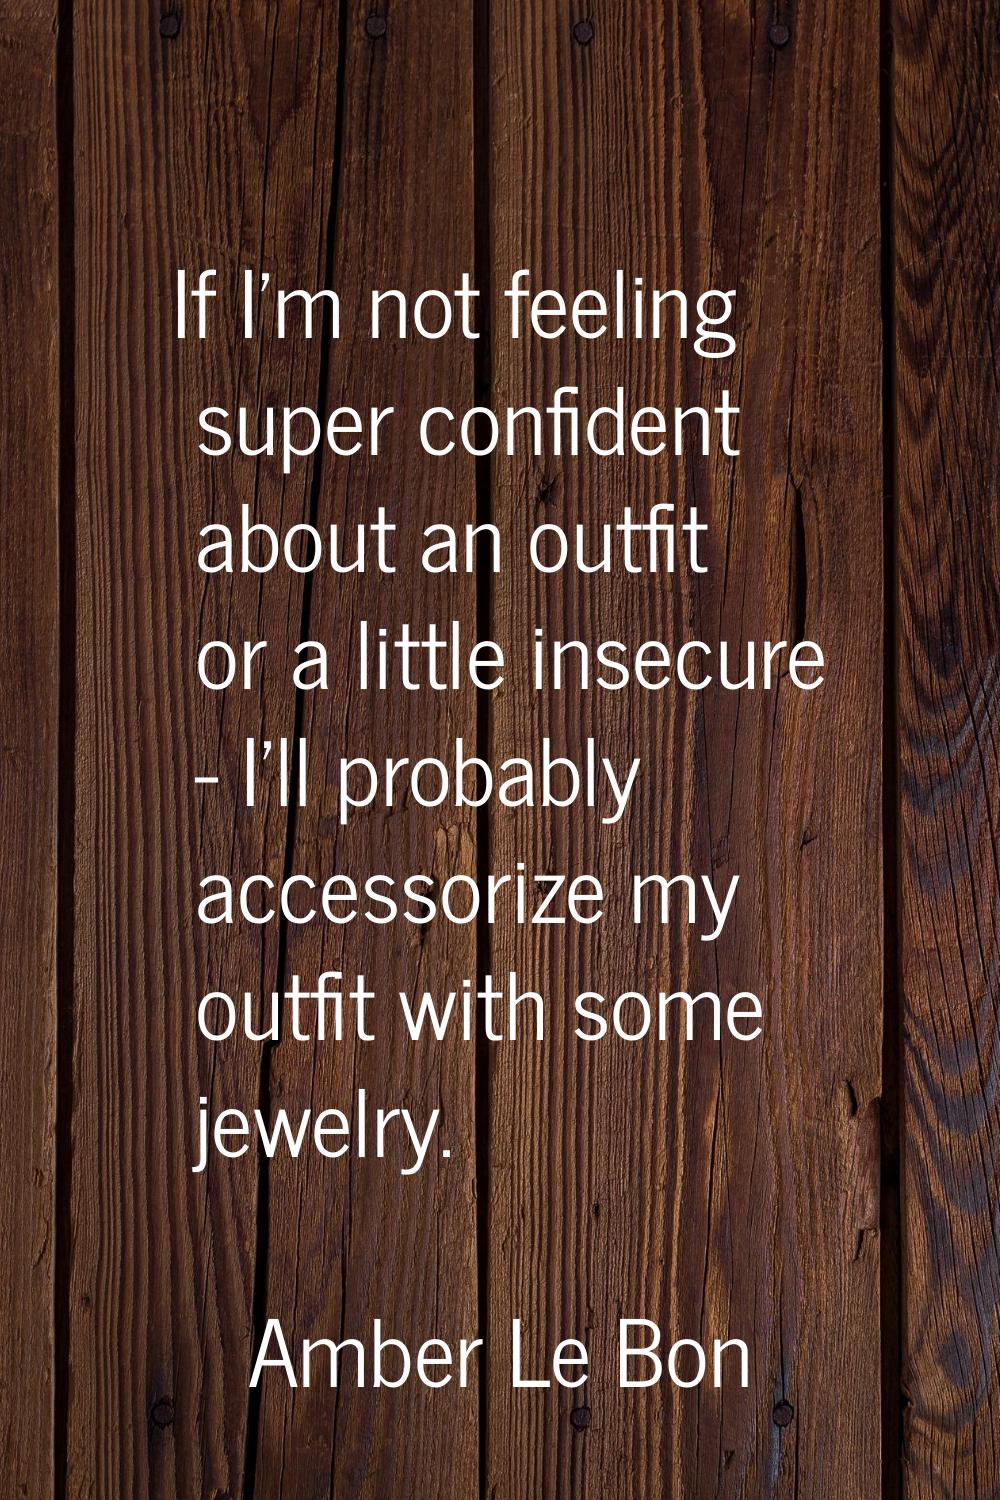 If I'm not feeling super confident about an outfit or a little insecure - I'll probably accessorize